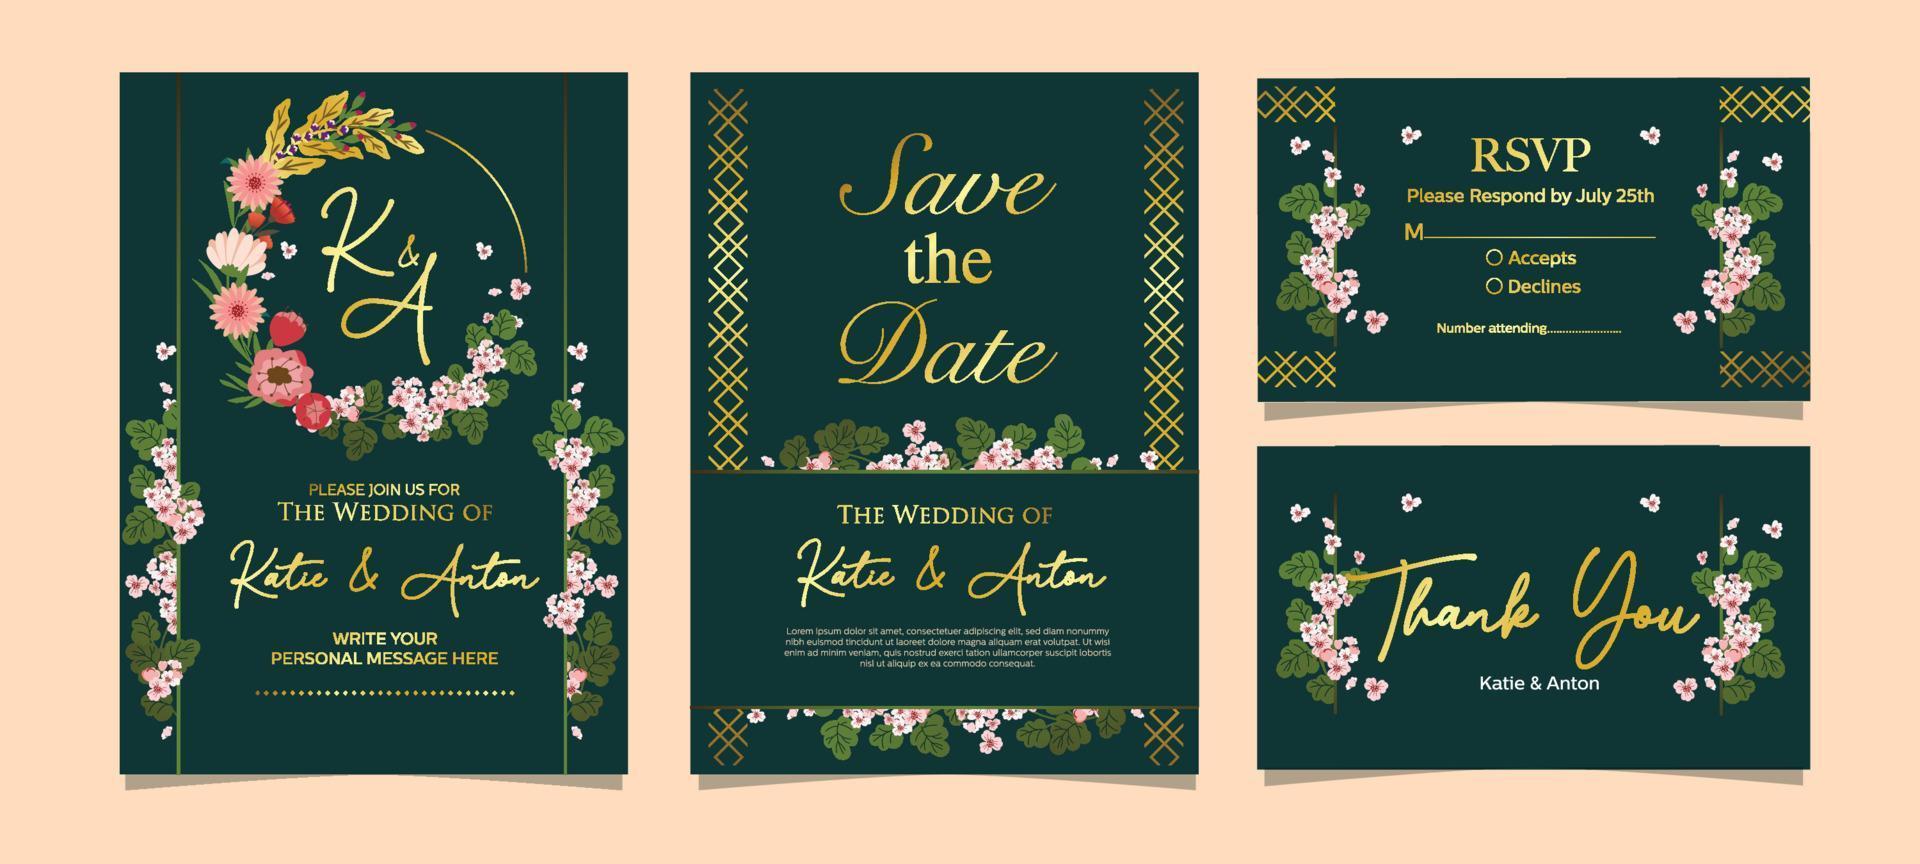 Modern Wedding Invitation with Floral Ornament vector